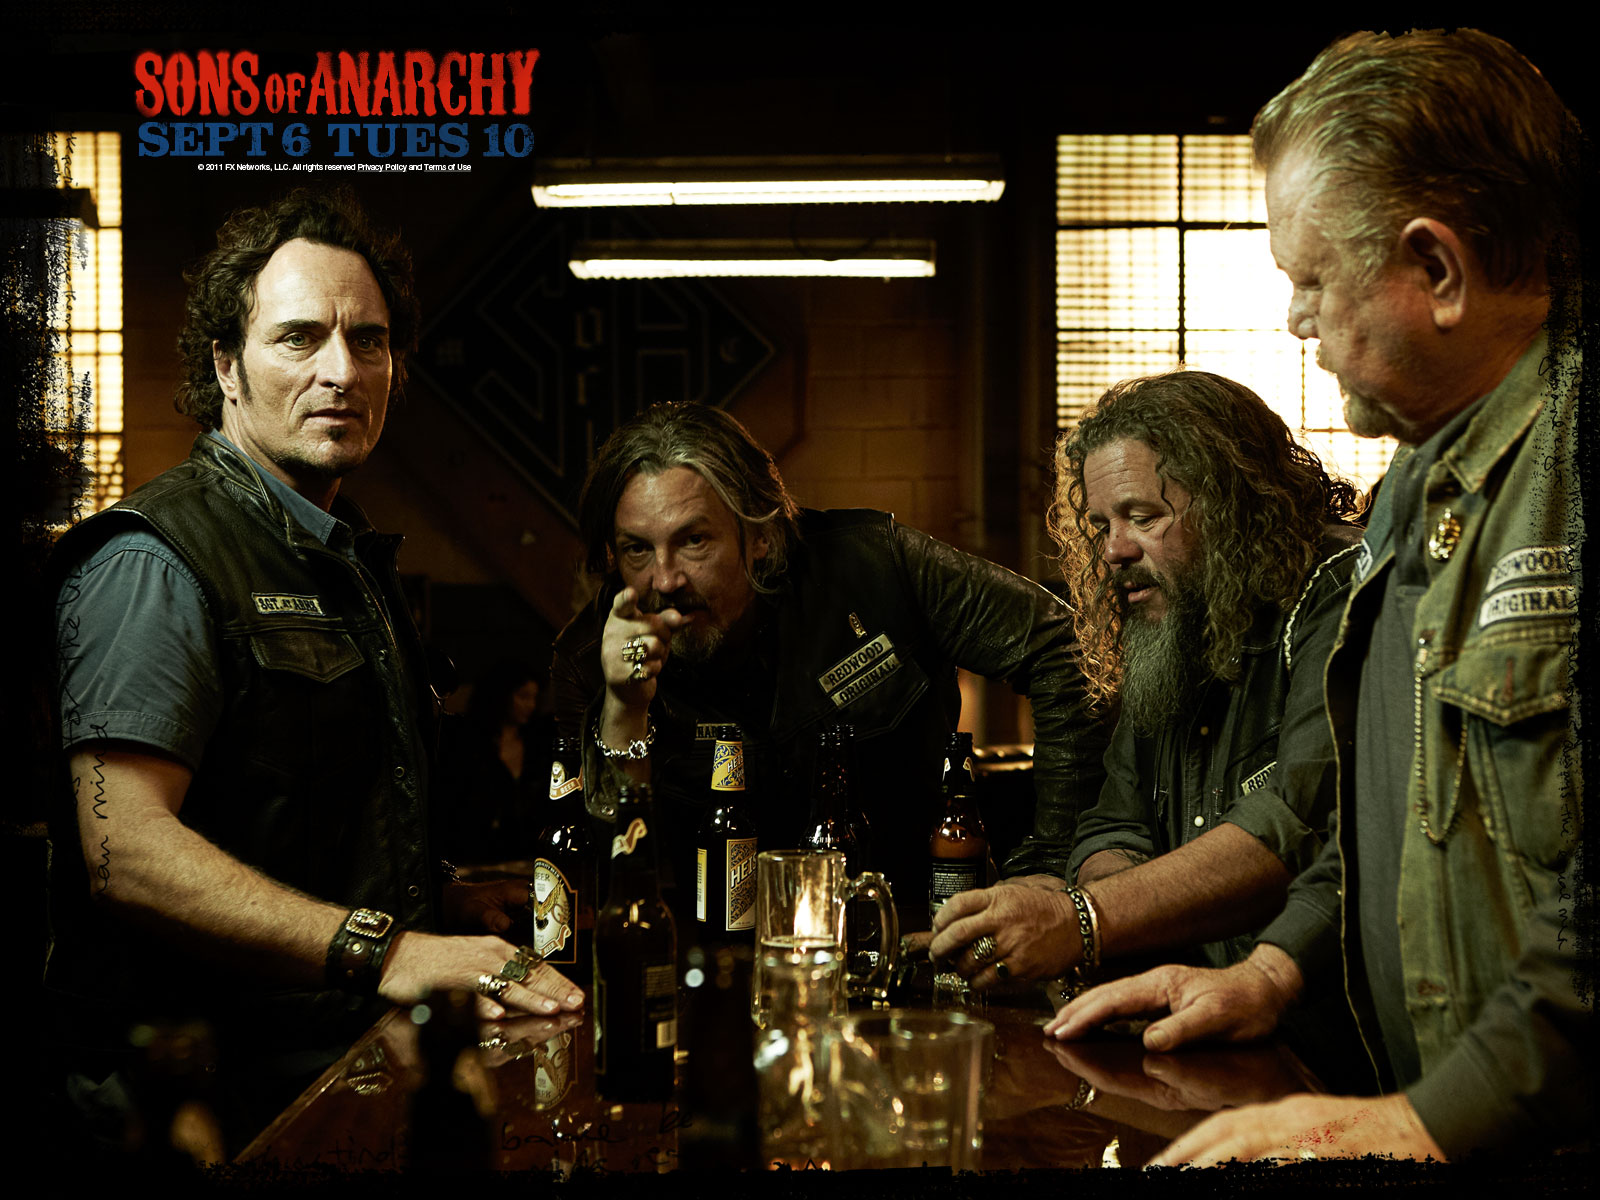 Sons of Anarchy - Season 4 Insight - YouTube